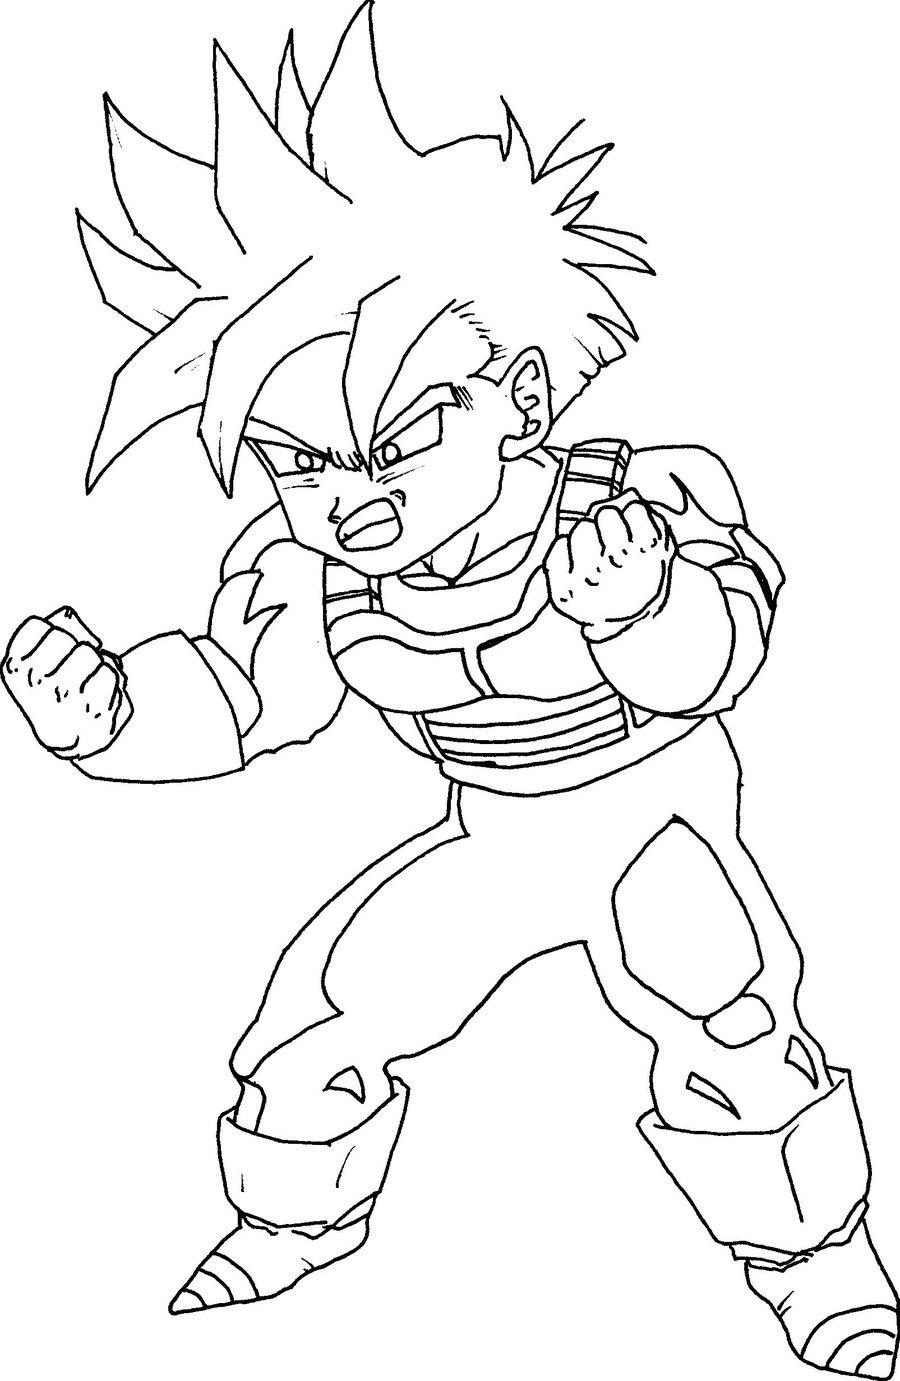 Gohan Dbz coloring page